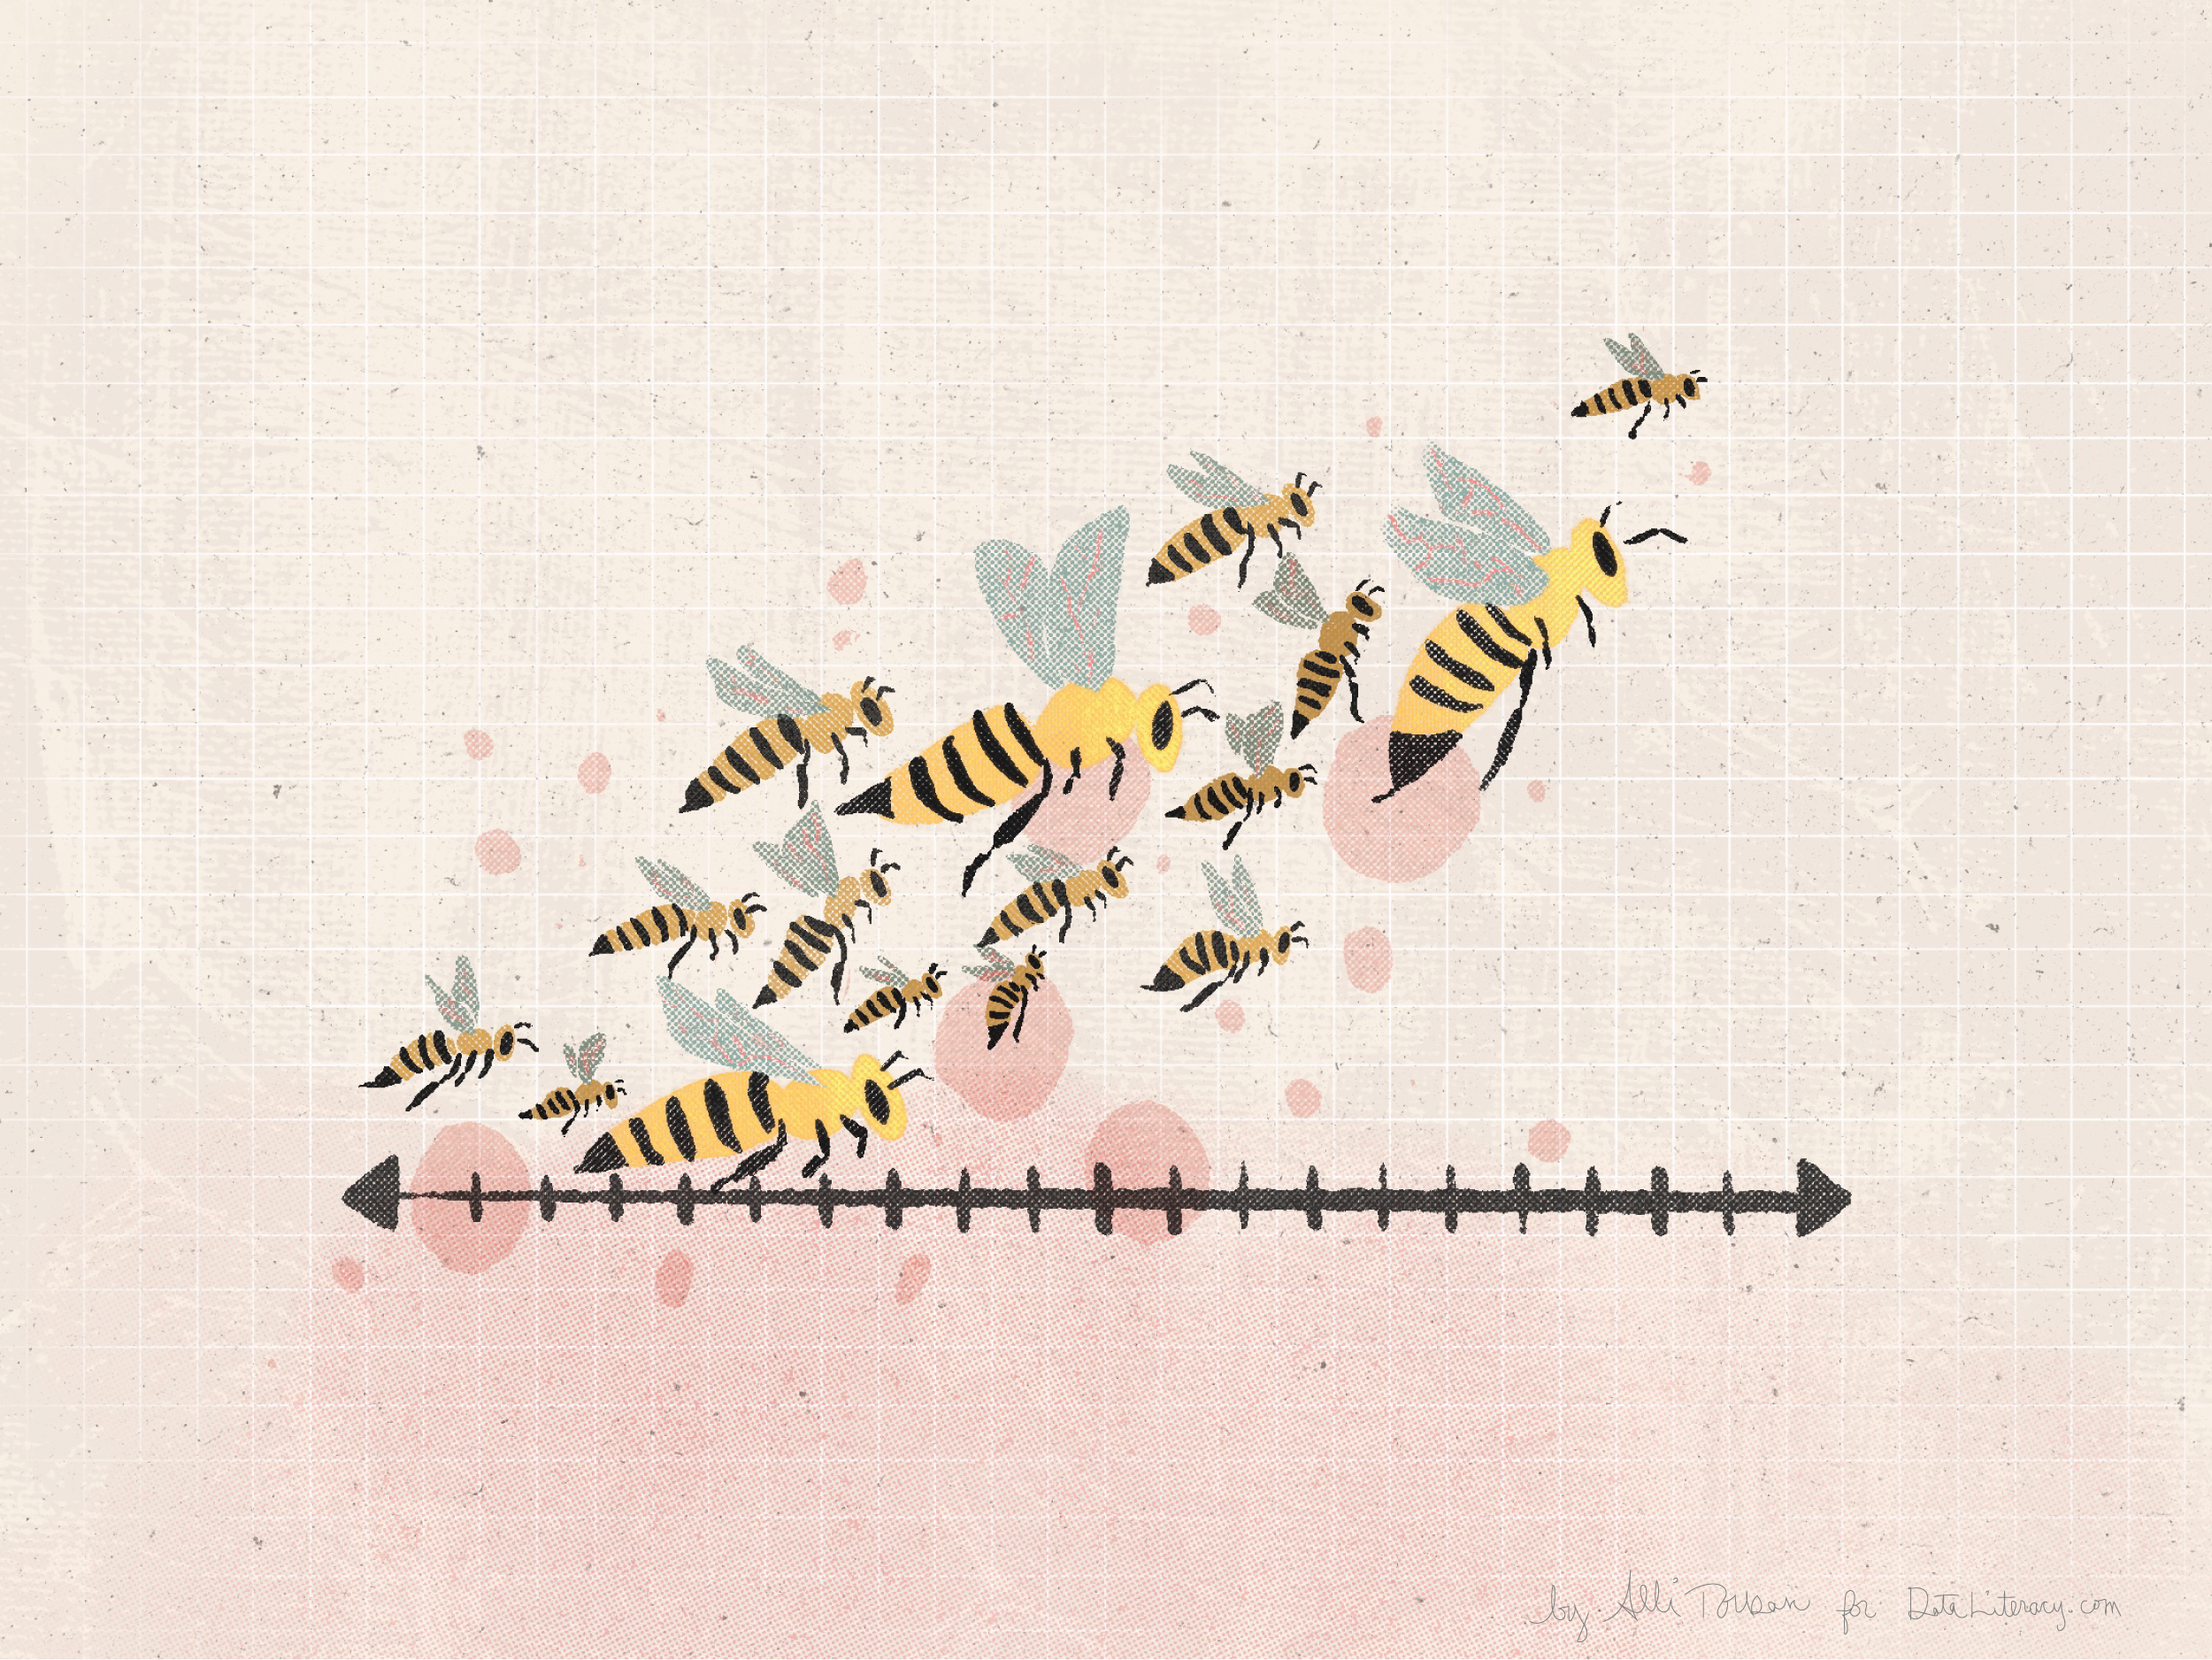 Illustration of bees swarming around a fake axis